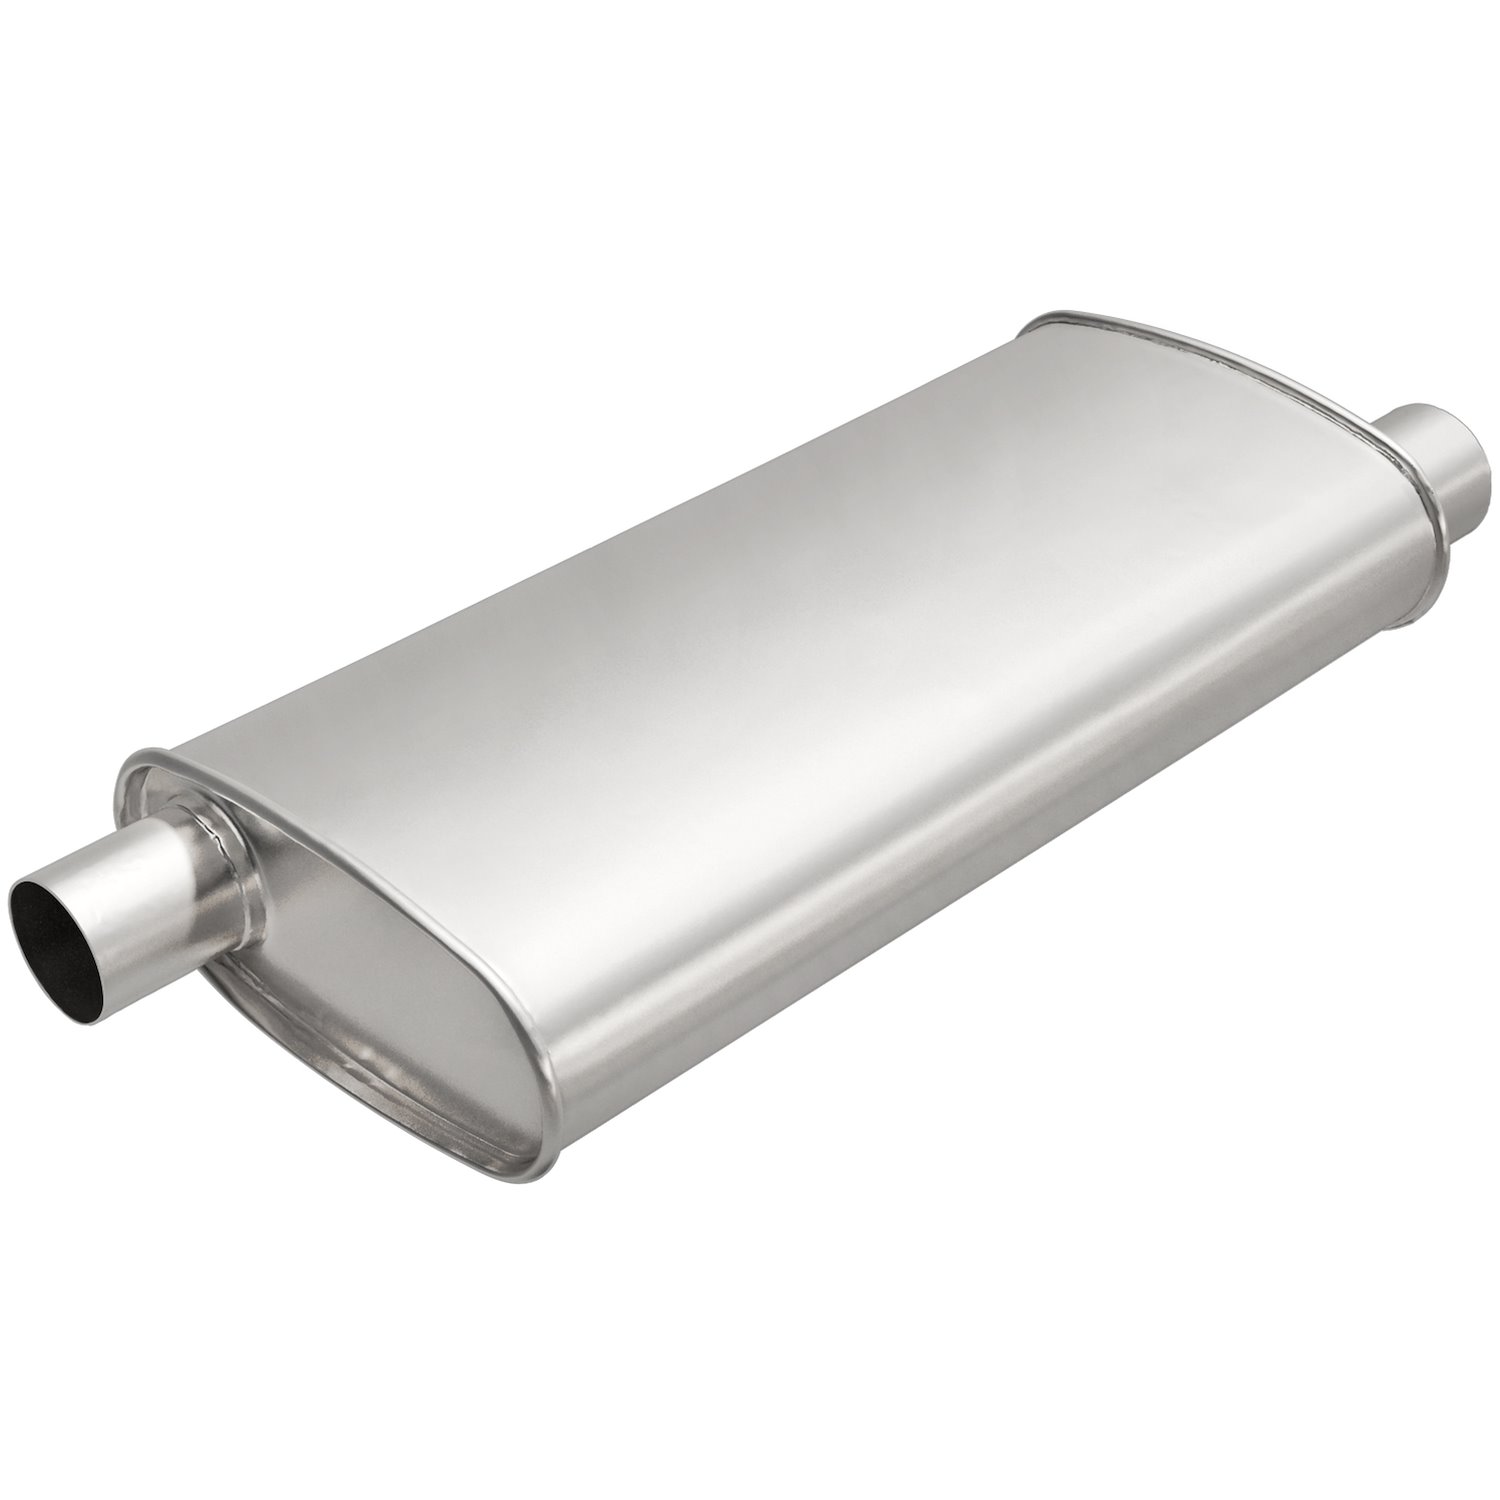 Universal Exhaust Muffler, Oval, Inlet/Outlet: 2.25 in./2 in.